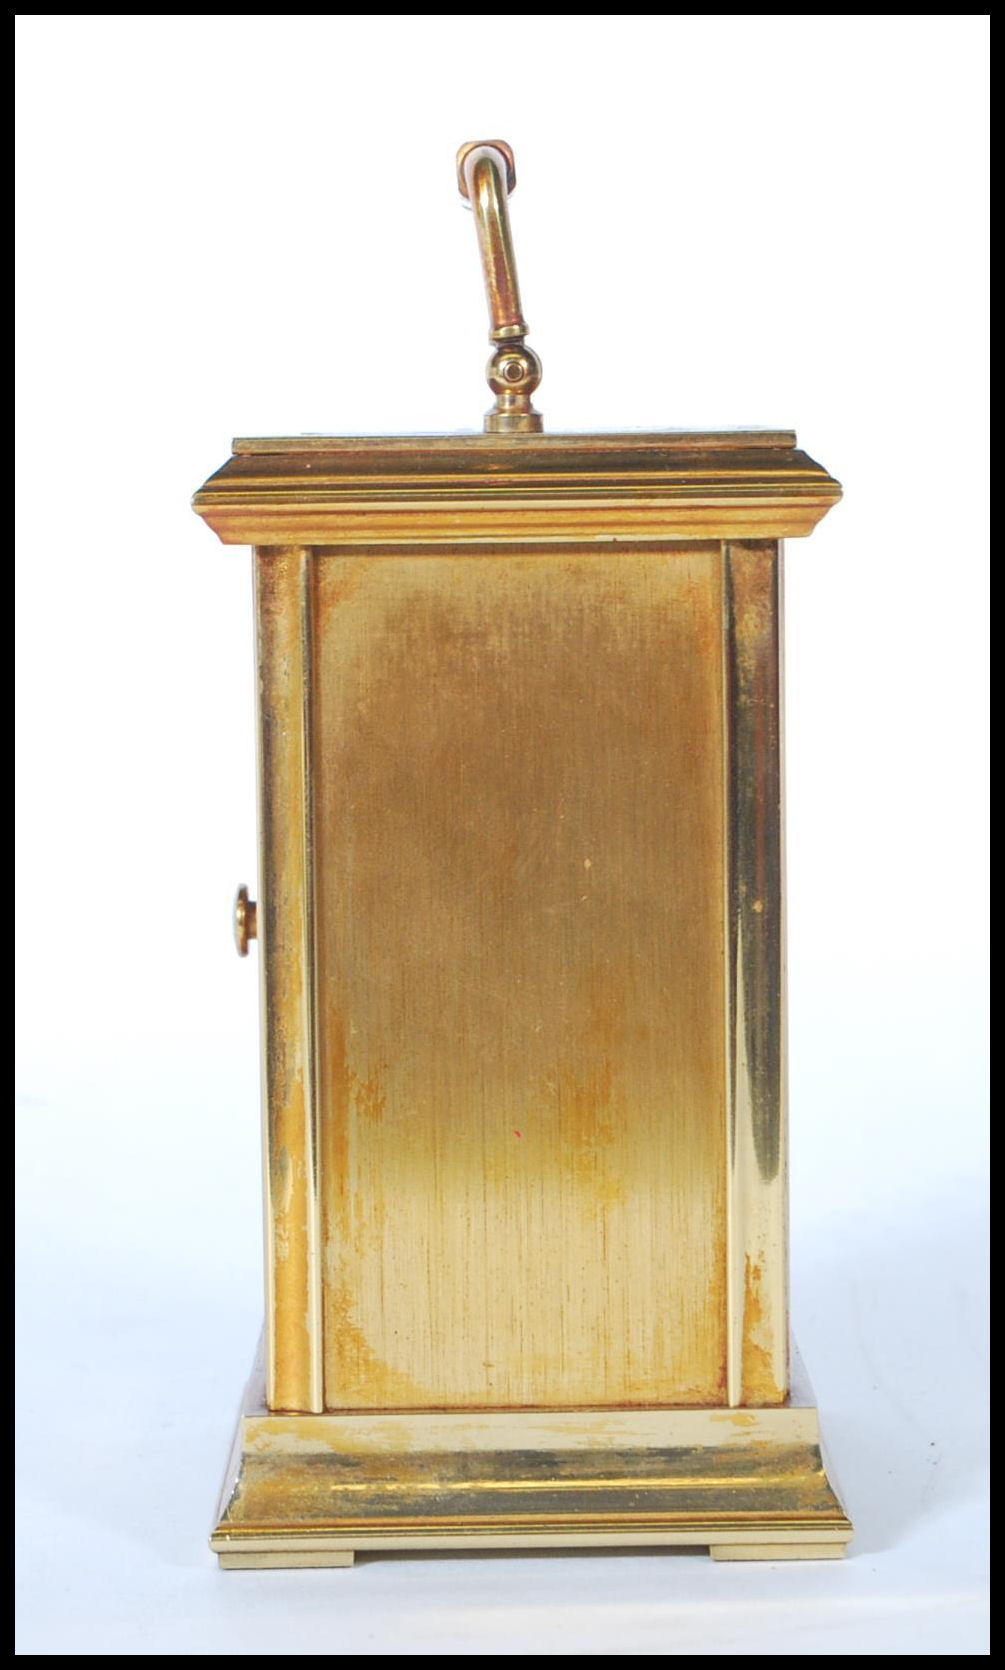 A St James 20th century century brass cased carria - Image 2 of 6